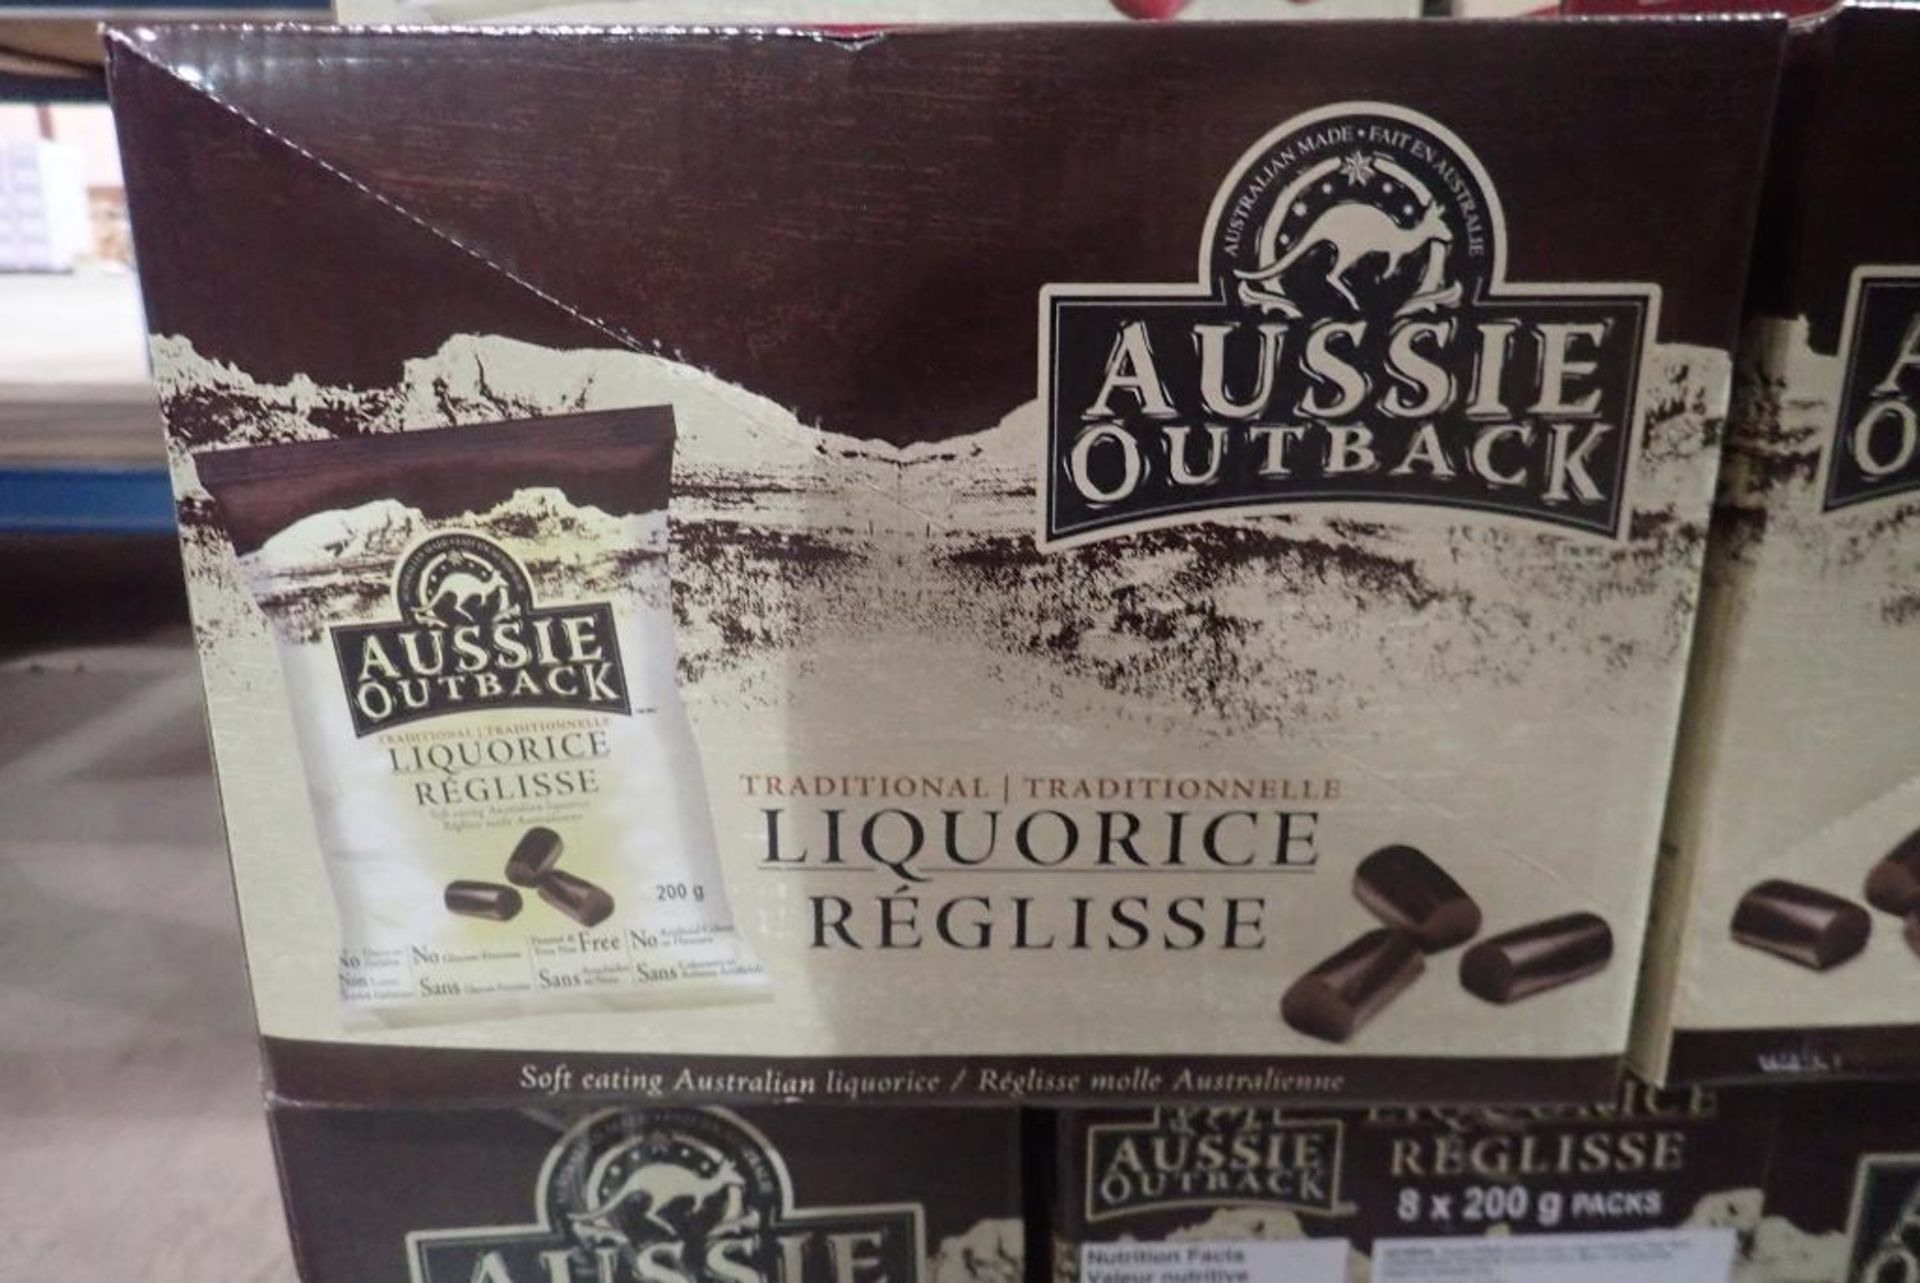 Lot of Aussie Outback Liquorice. - Image 3 of 3